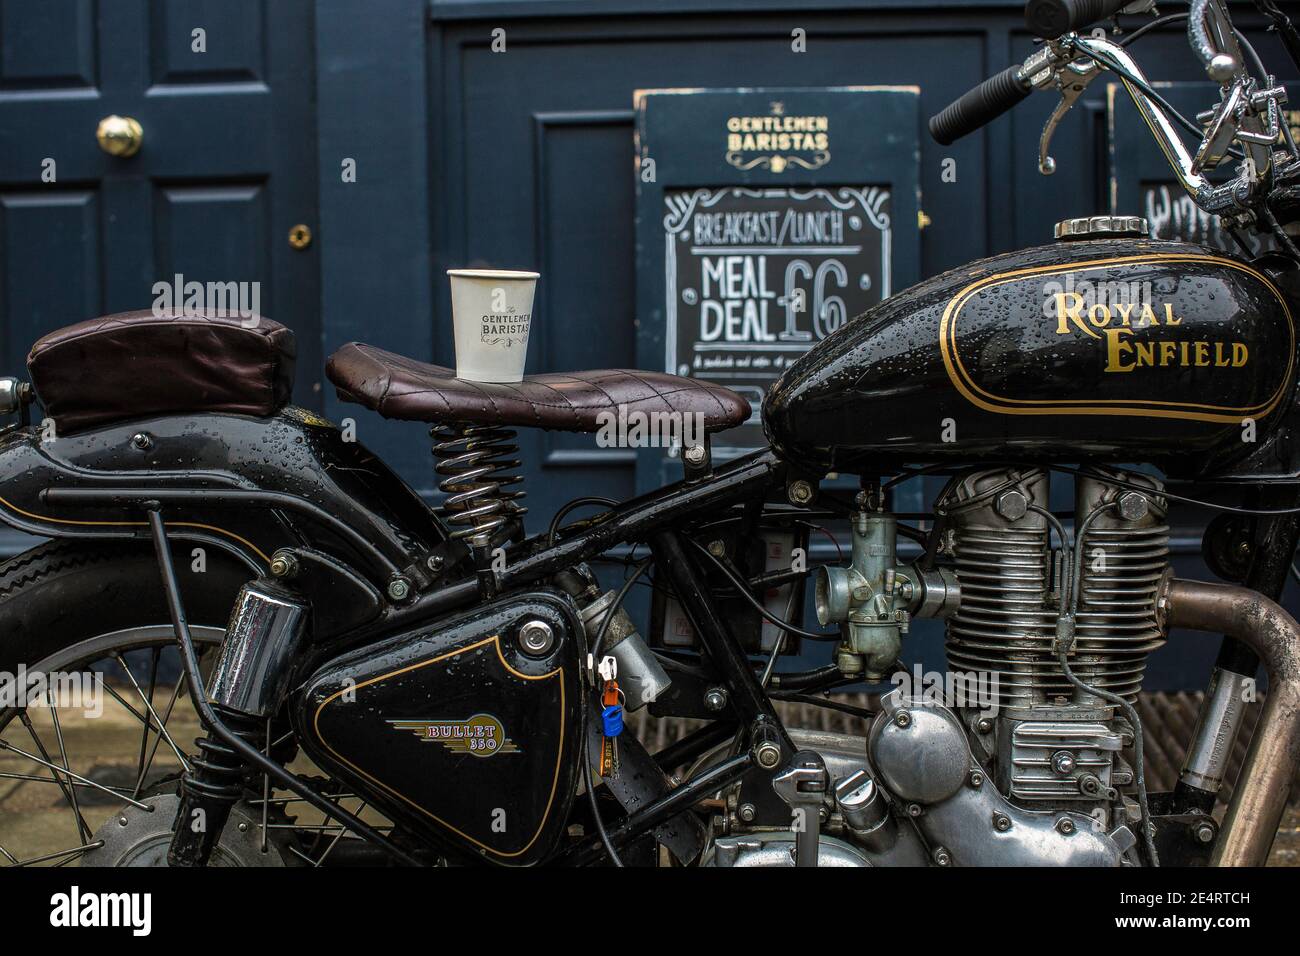 classic motorcycle parked in front of a coffee shop Stock Photo